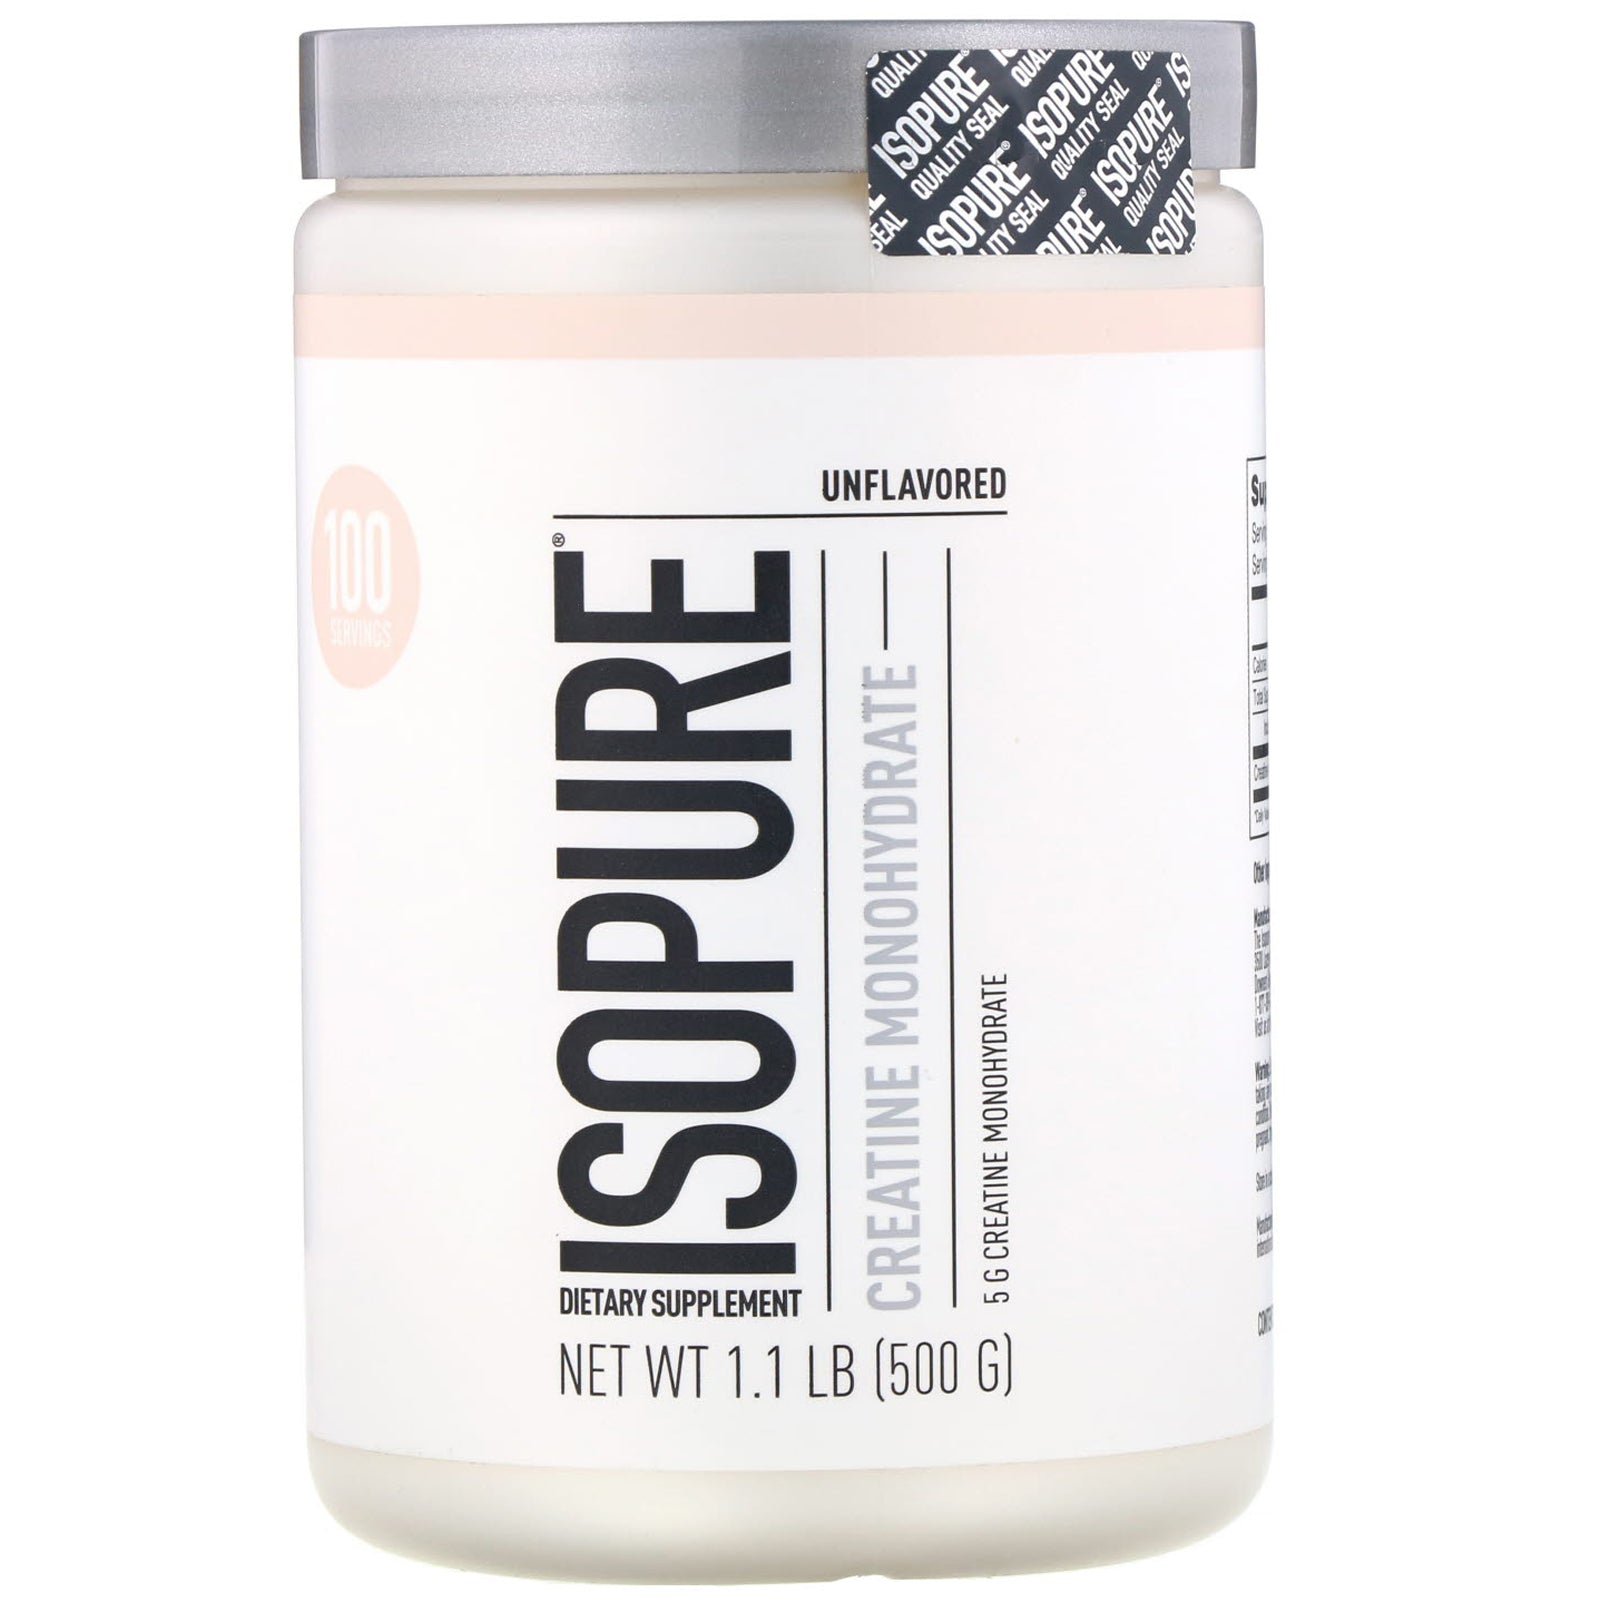 Isopure, Creatine Monohydrate, Unflavored, 1.1 lb (500 g)